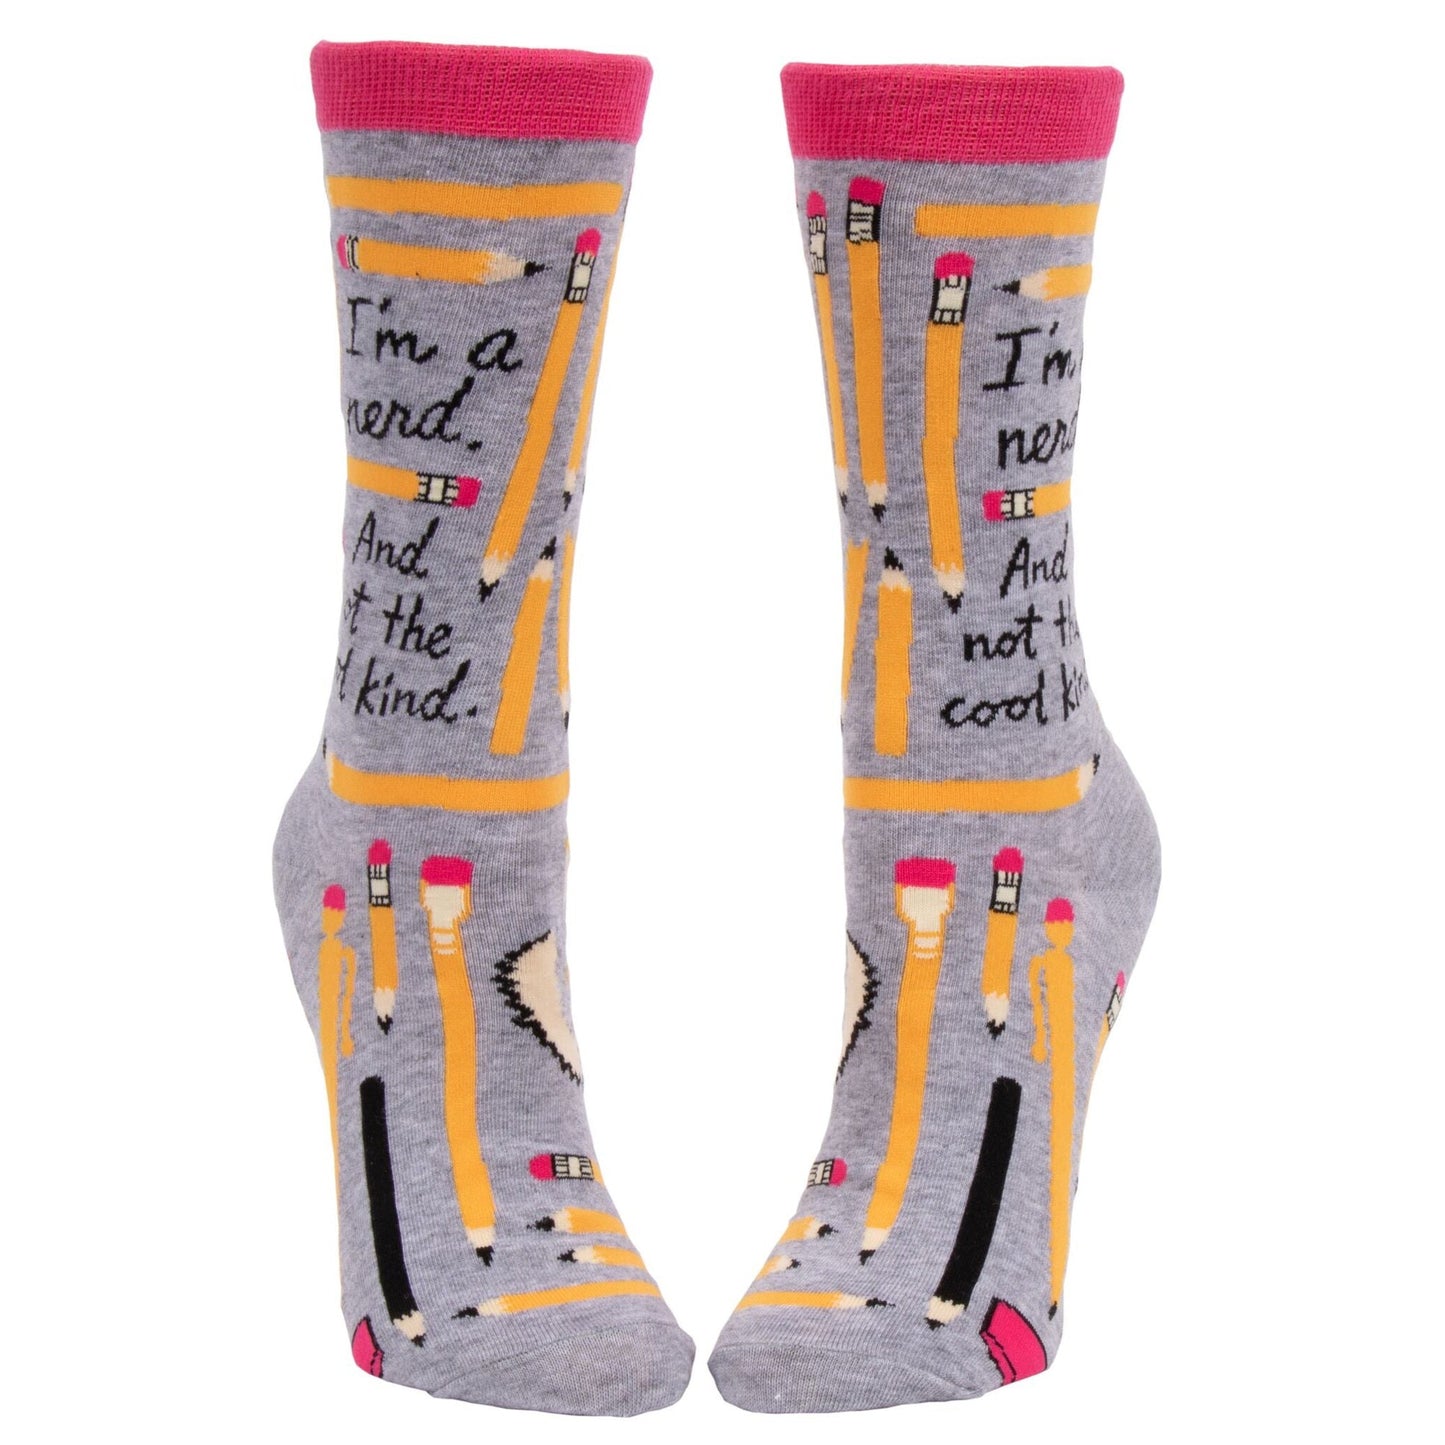 I'm A Nerd and Not the Cool Kind Women's Crew Socks in Heather Gray and Pink